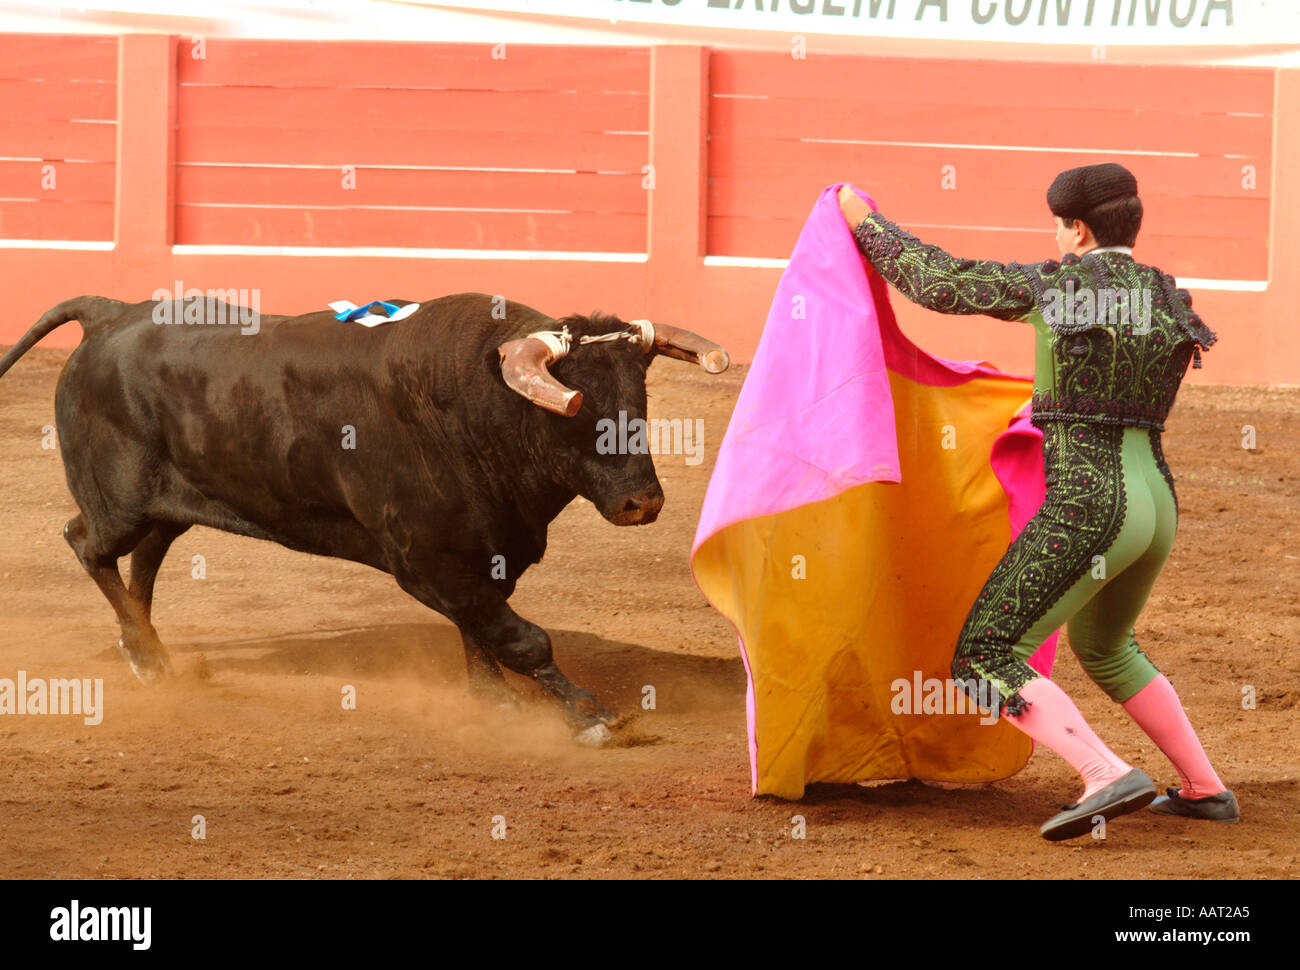 A matador encourages a bull to charge with his colorful cape at a bullfight in Graciosa, Azores, Portugal. Stock Photo